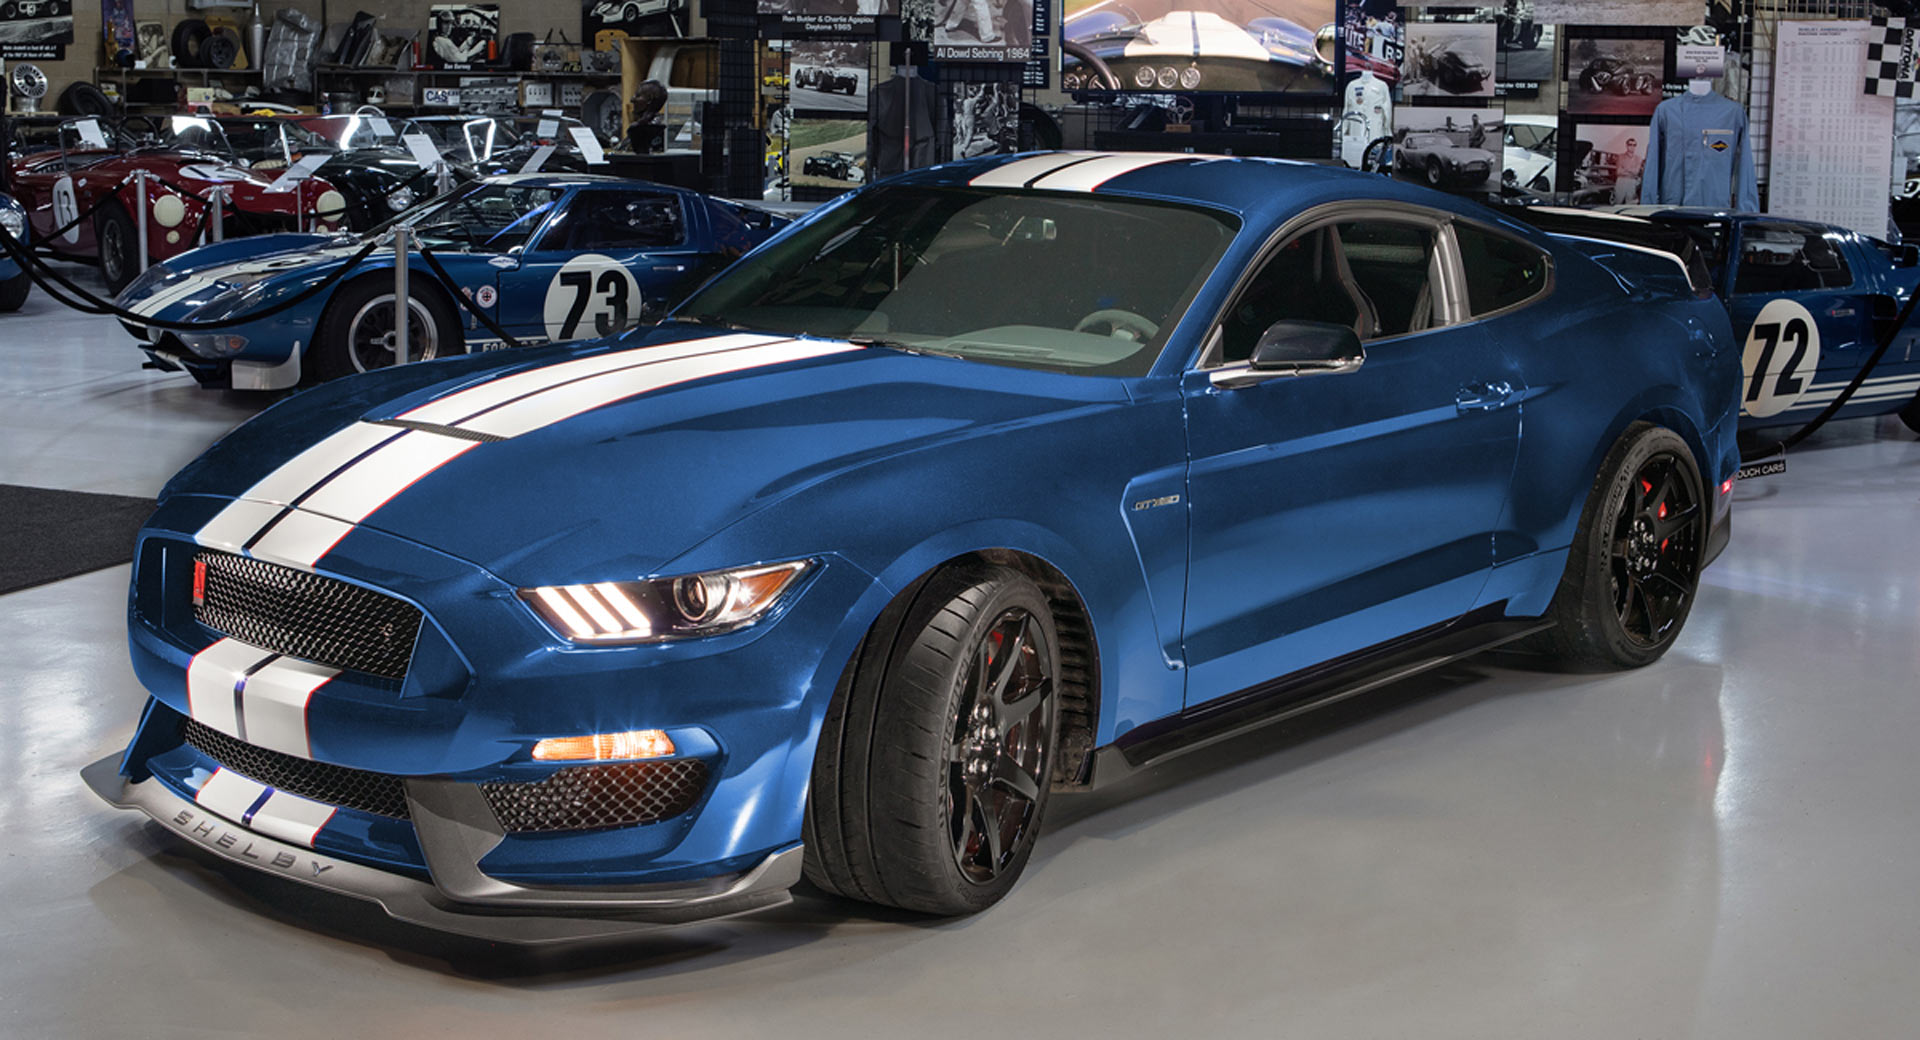 Enter A Raffle For $25, Win This 2019 Mustang Shelby GT350R | Carscoops